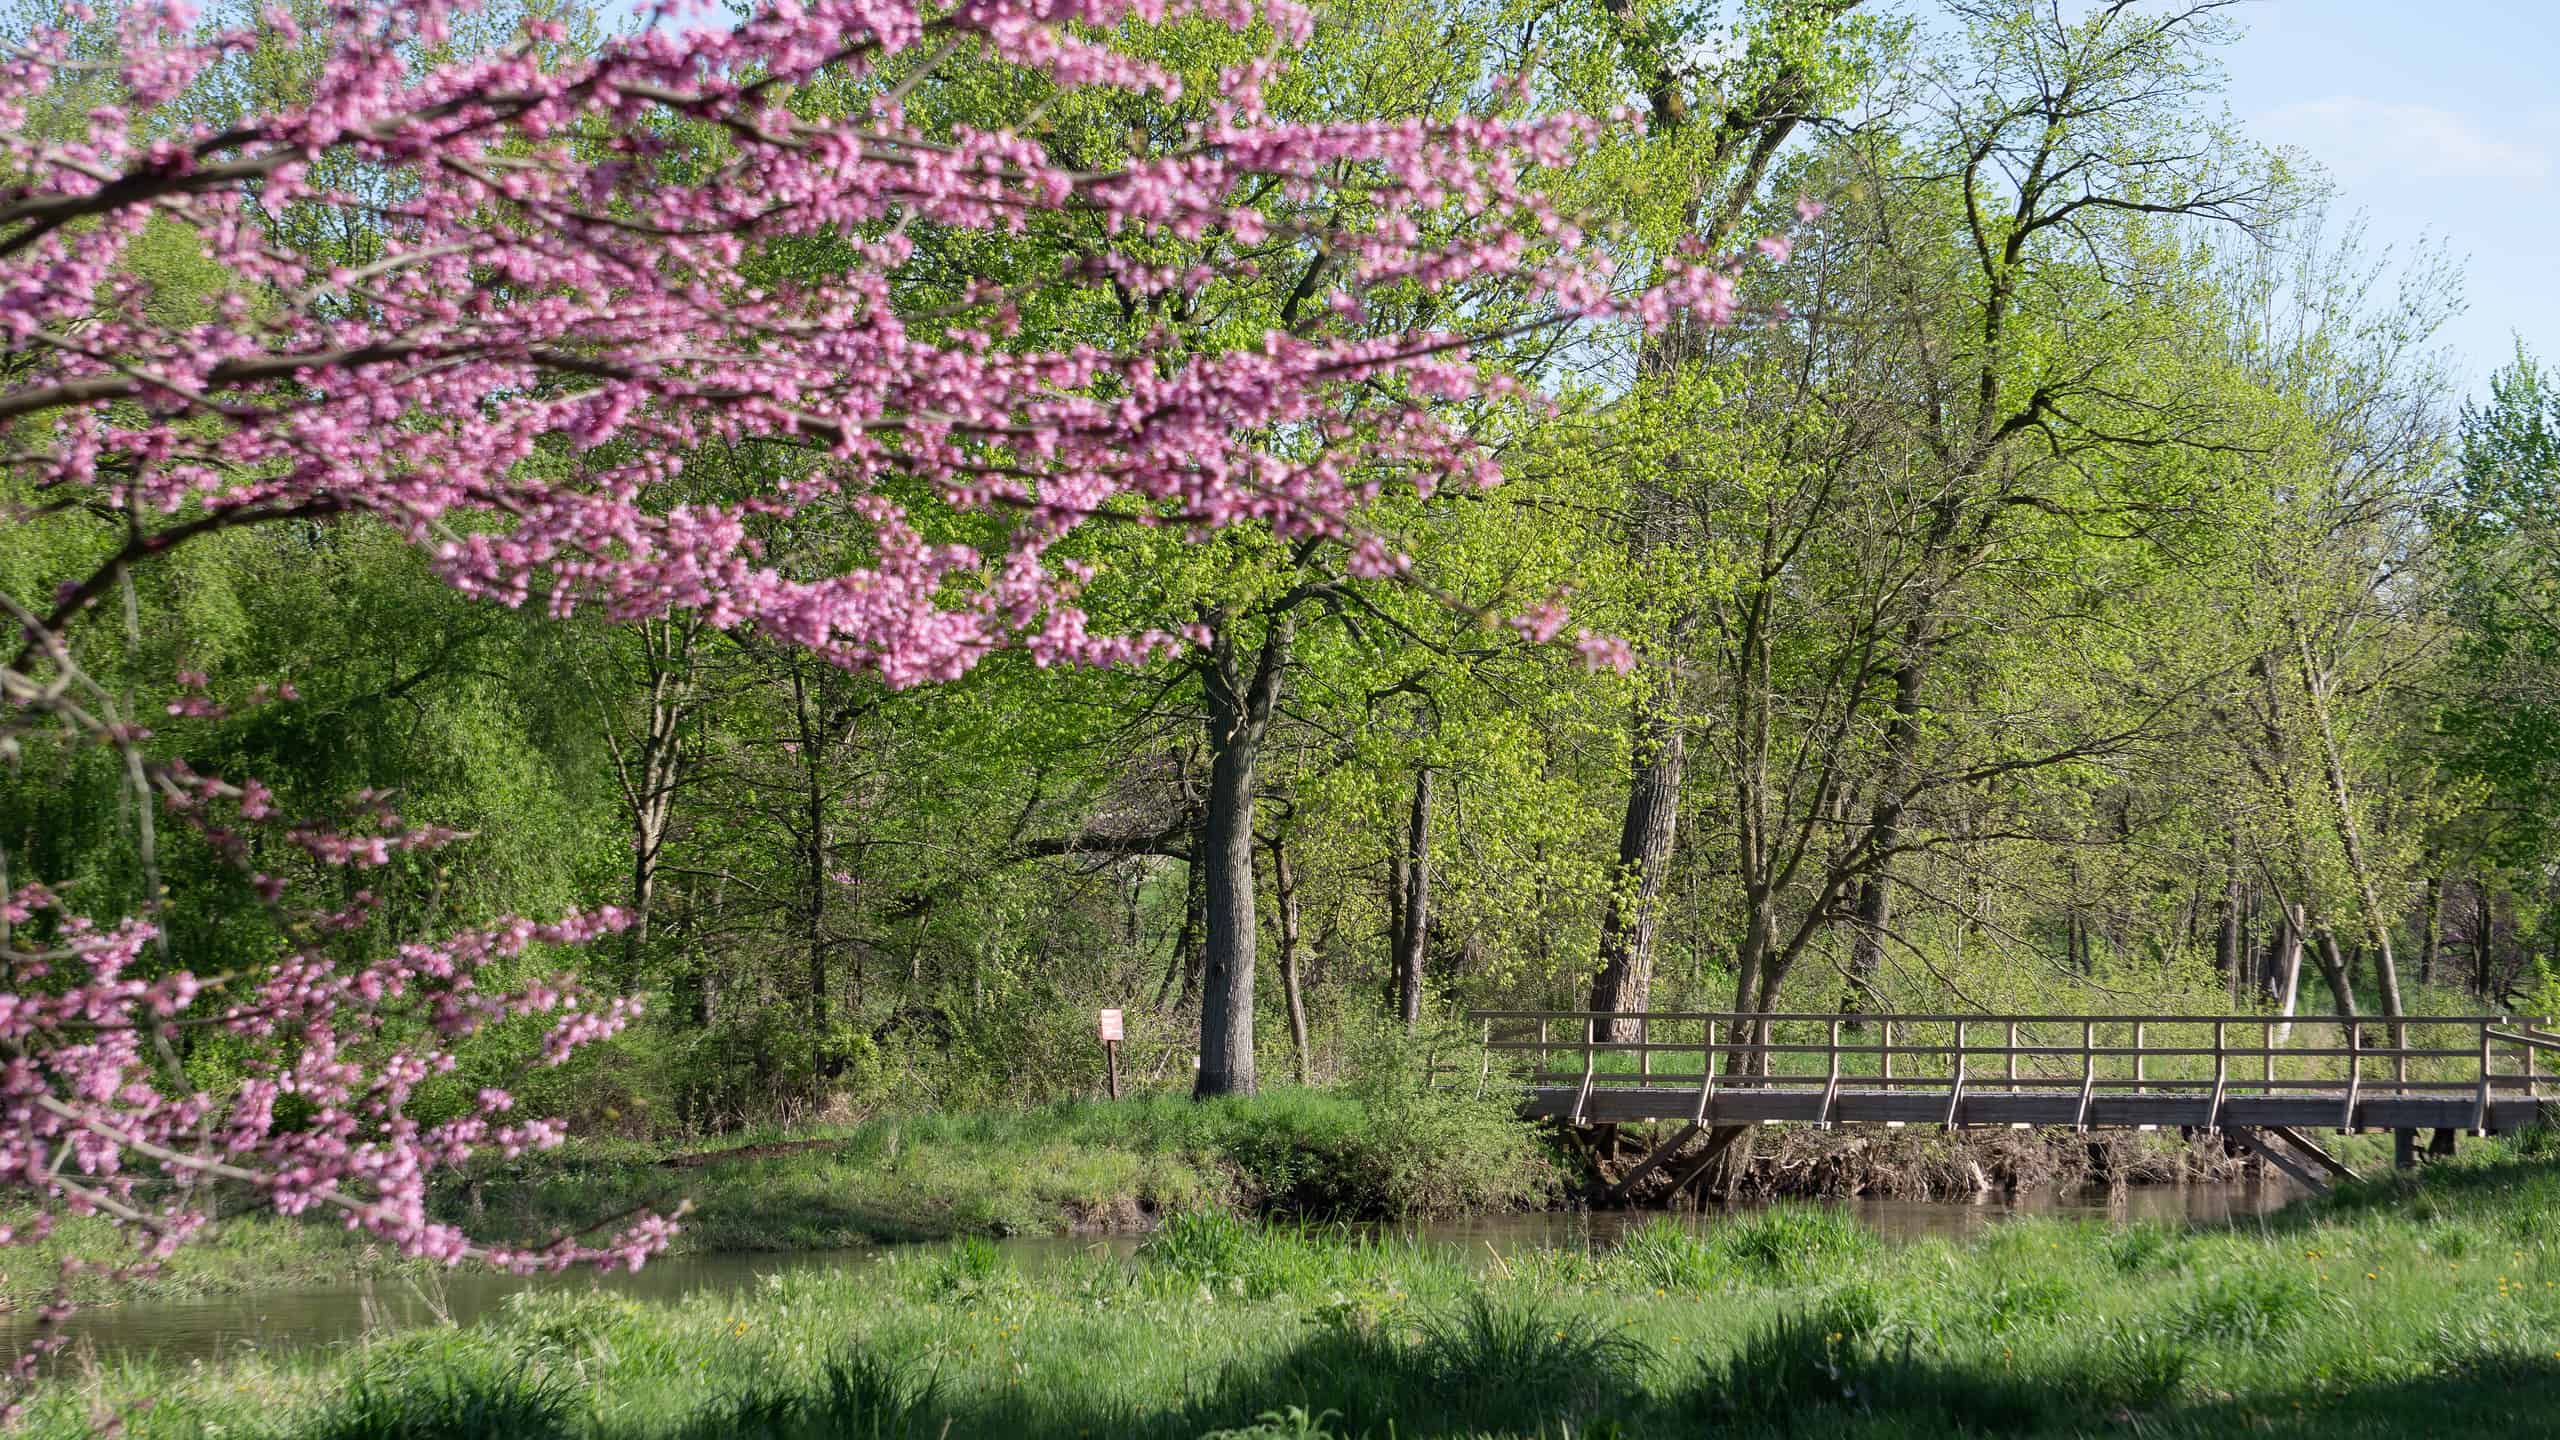 <p>There are several spots for peak viewing of the blooming cherry blossom trees in Chicago. One of the best locations is in the suburbs at the Morton Arboretum in Lisle. </p><p>Sharks, lions, alligators, and more! Don’t miss today’s latest and most exciting animal news. <strong><a href="https://www.msn.com/en-us/channel/source/AZ%20Animals%20US/sr-vid-7etr9q8xun6k6508c3nufaum0de3dqktiq6h27ddeagnfug30wka">Click here to access the A-Z Animals profile page</a> and be sure to hit the <em>Follow</em> button here or at the top of this article!</strong></p> <p>Have feedback? Add a comment below!</p>